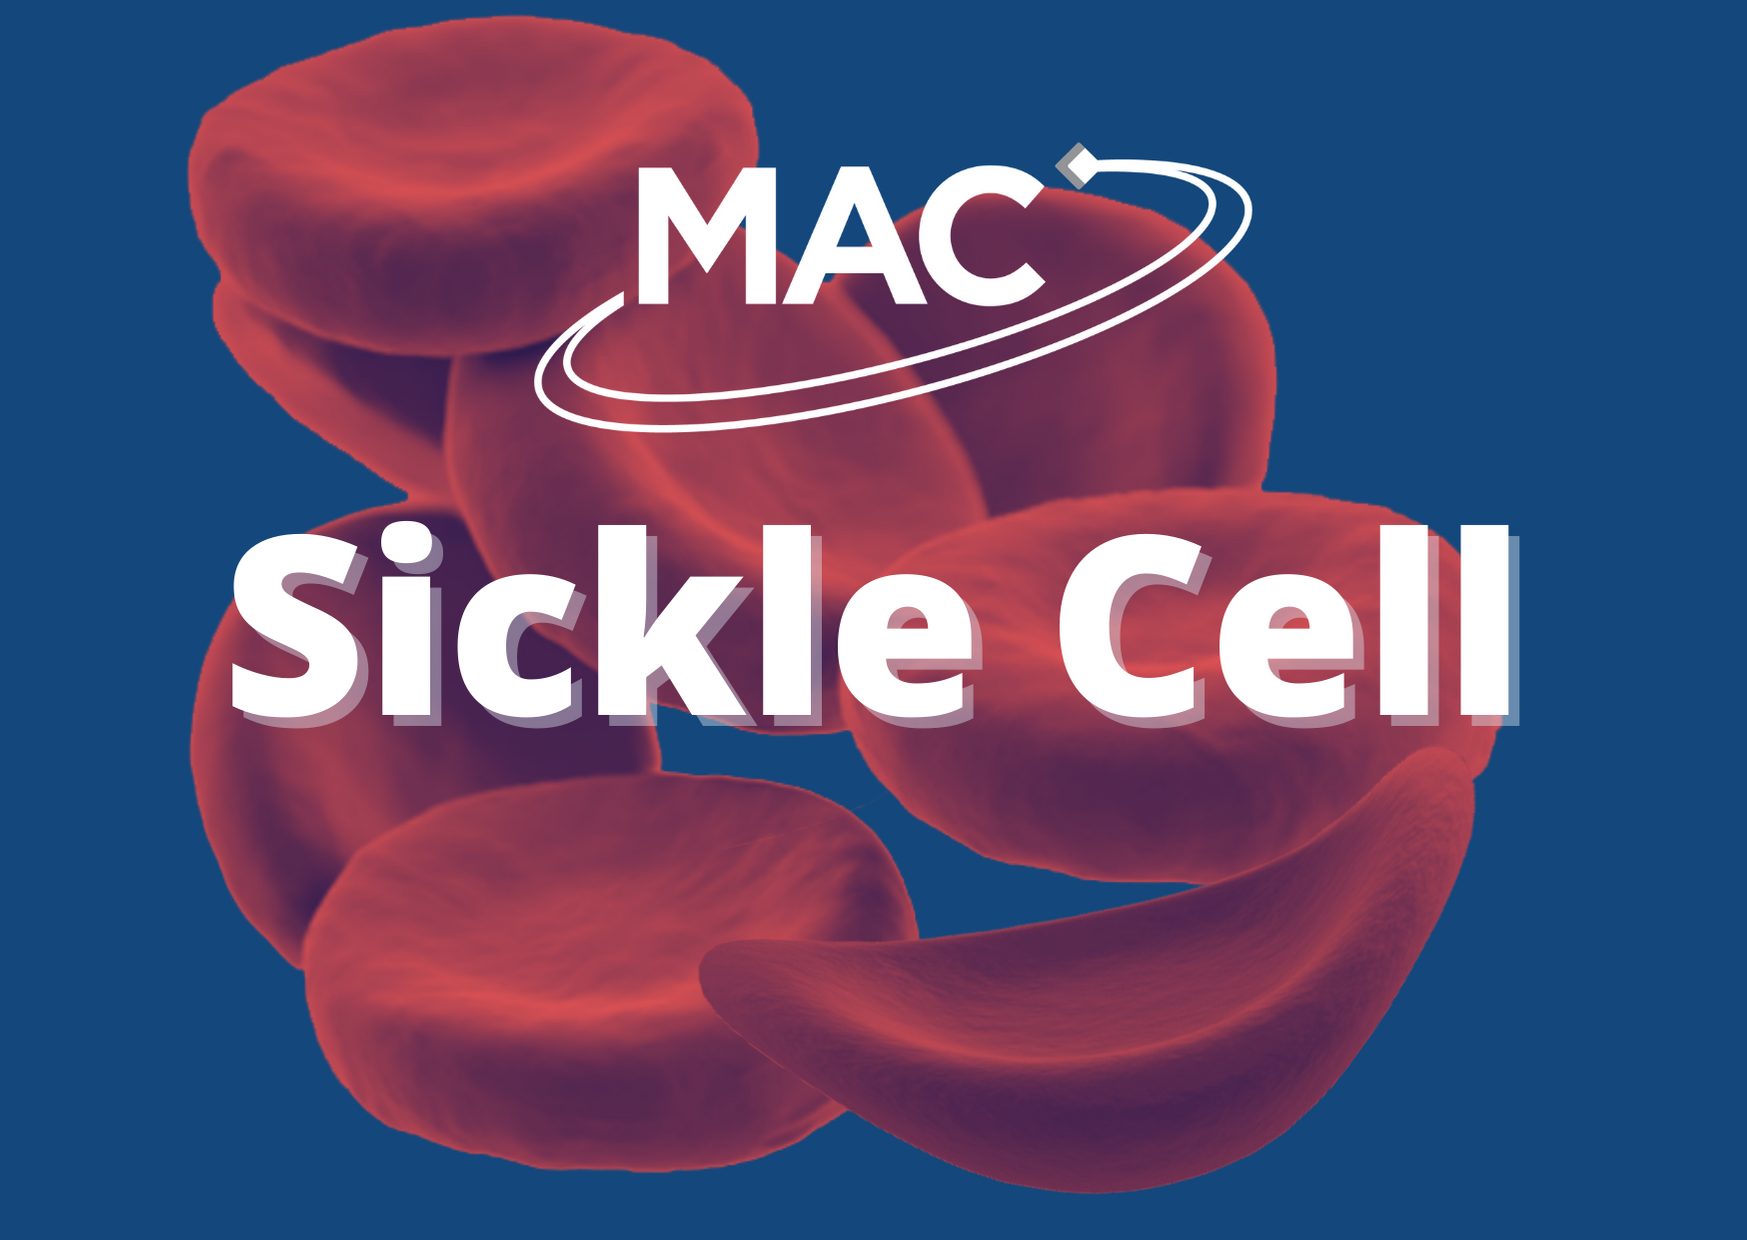 How sickle cell can impact someone’s life